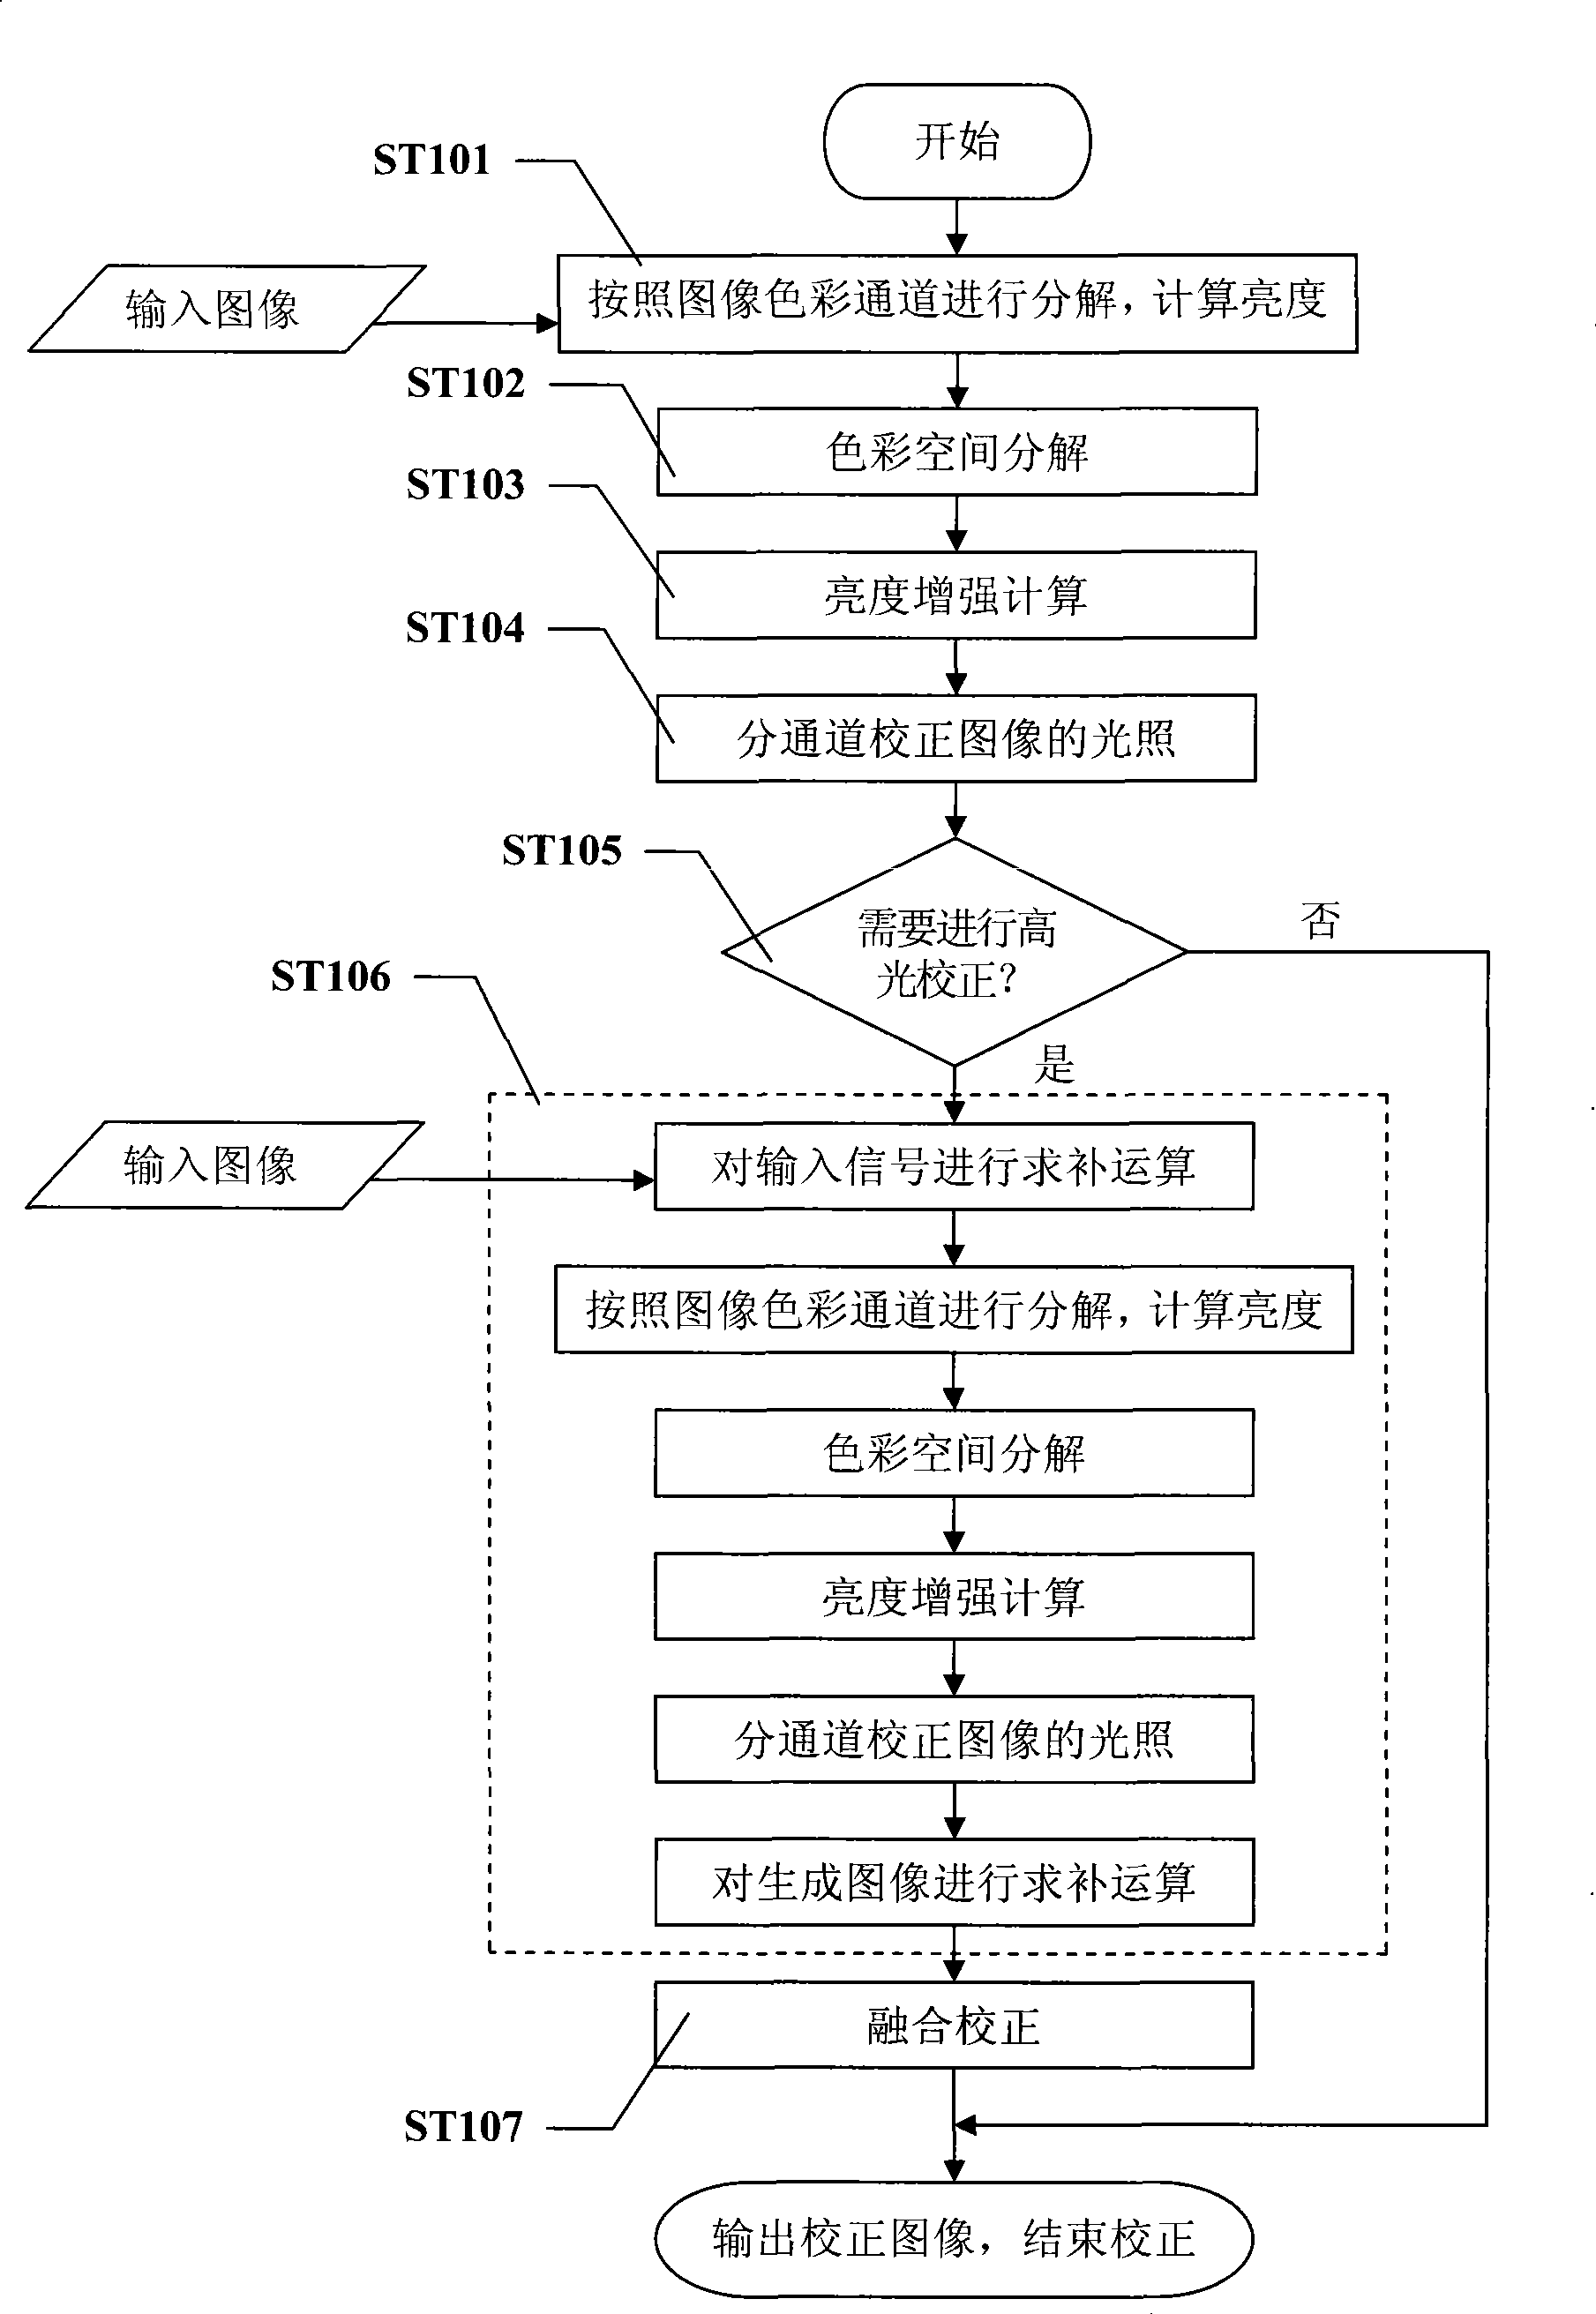 Image irradiation correcting method based on color domain mapping